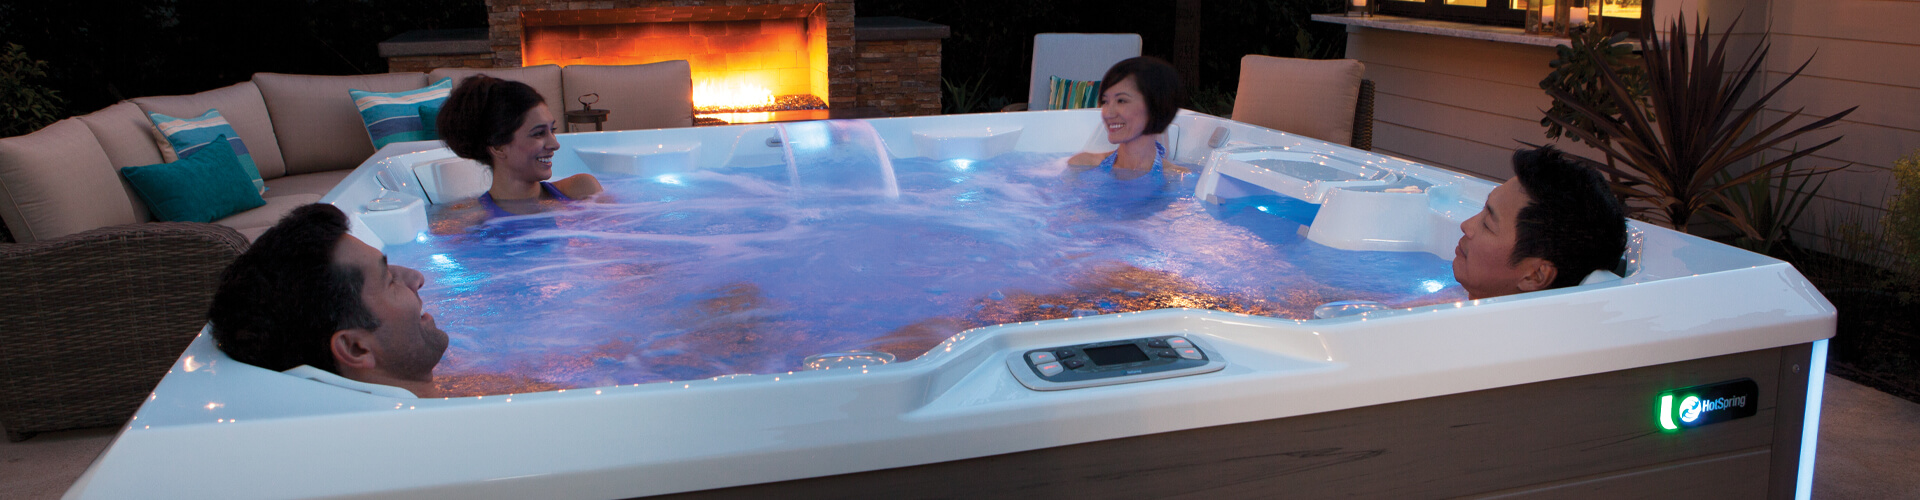 How Much Does it Cost to Run a Hot Tub?